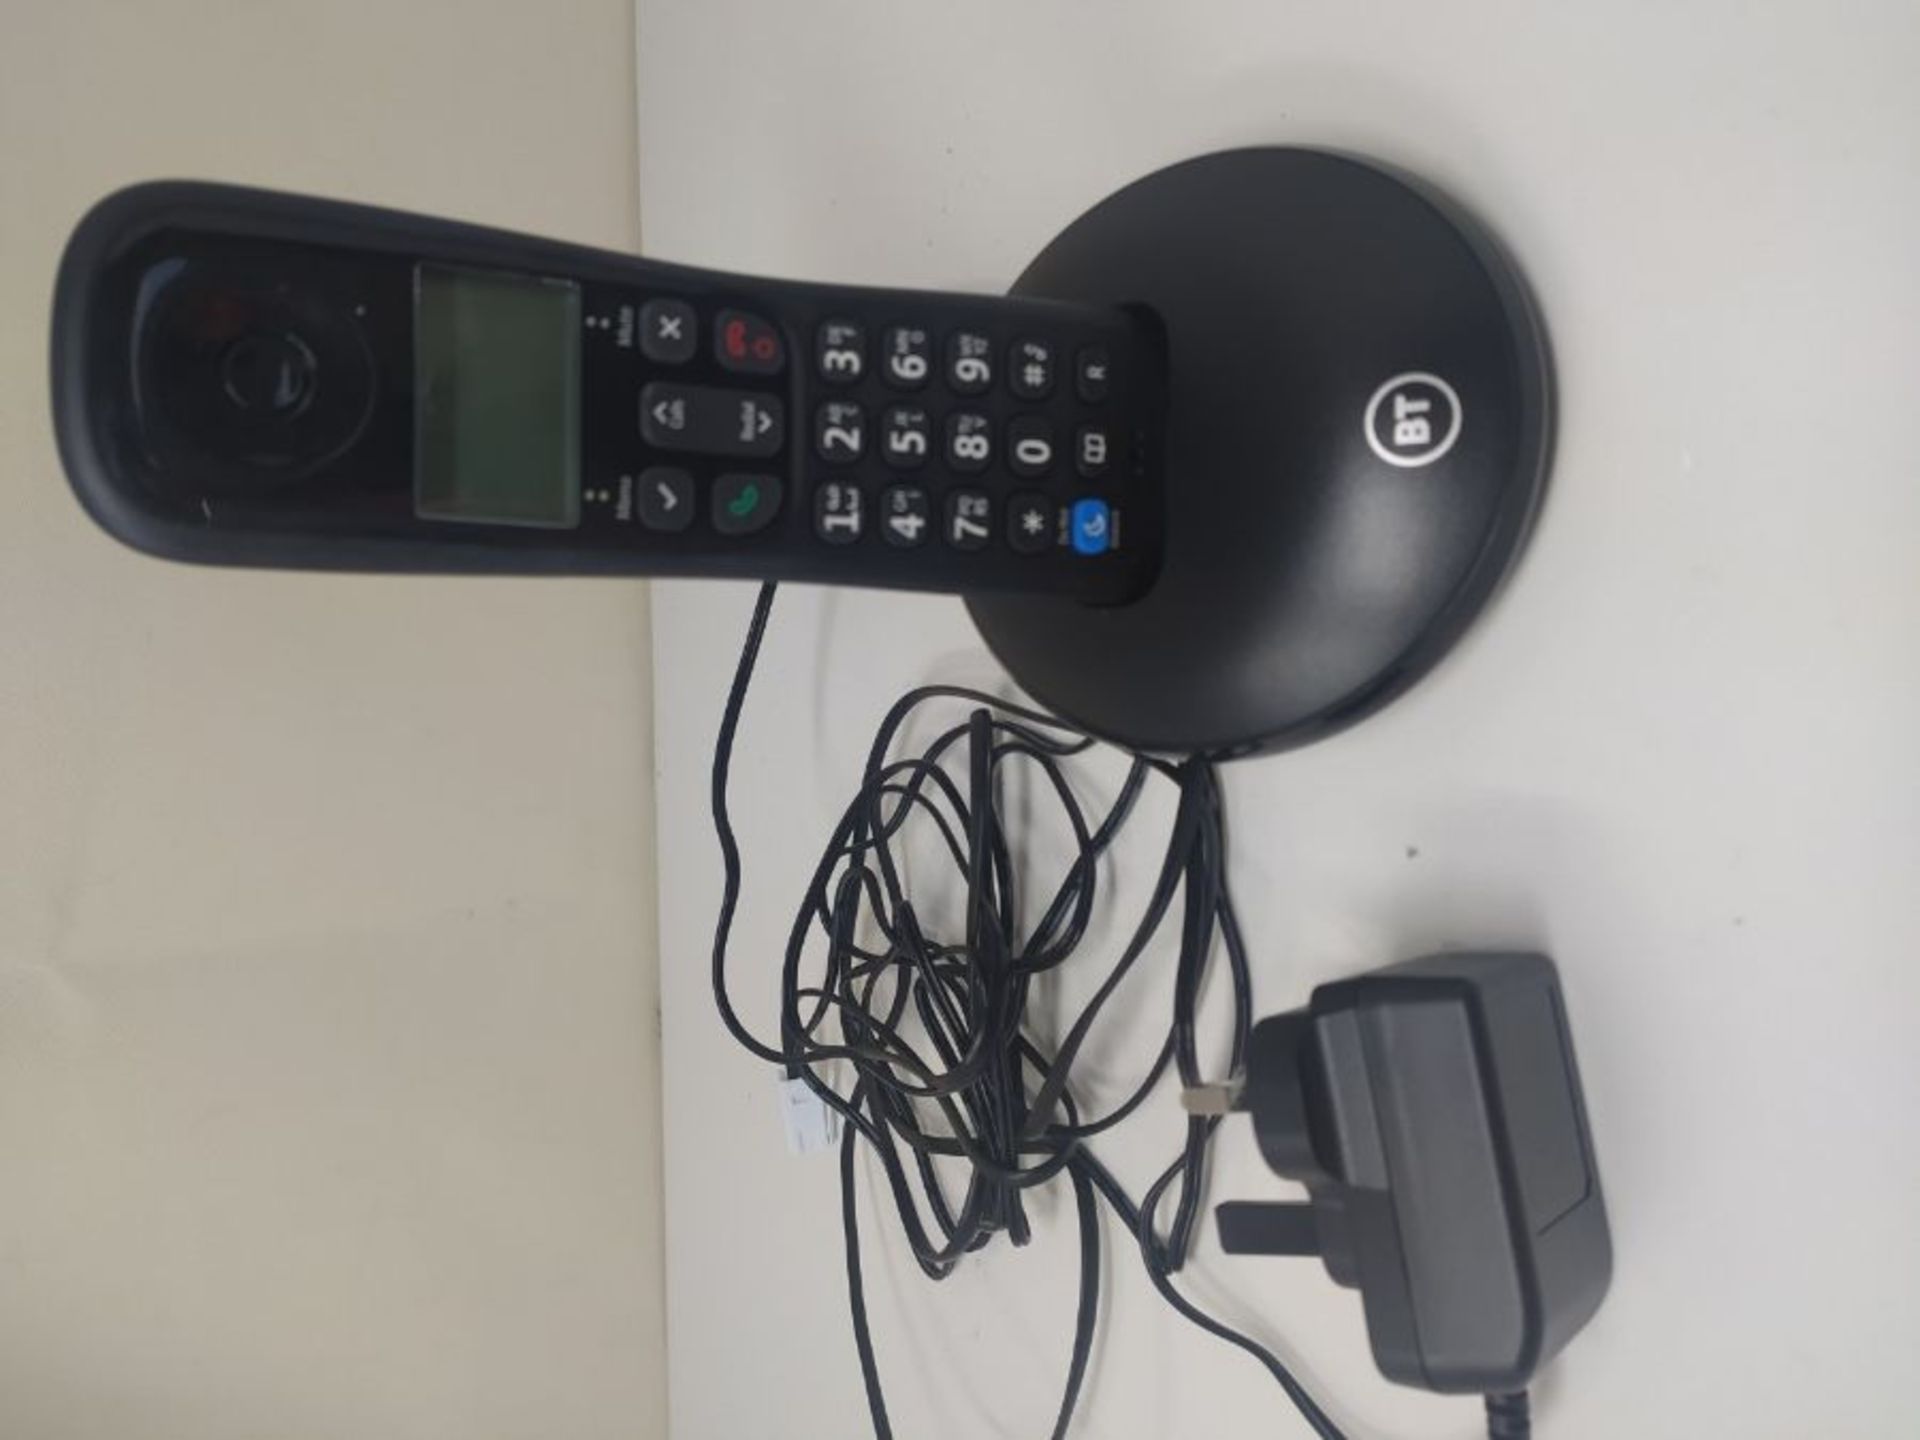 BT Everyday Cordless Home Phone with Basic Call Blocking, Single Handset Pack, Black - Image 2 of 2